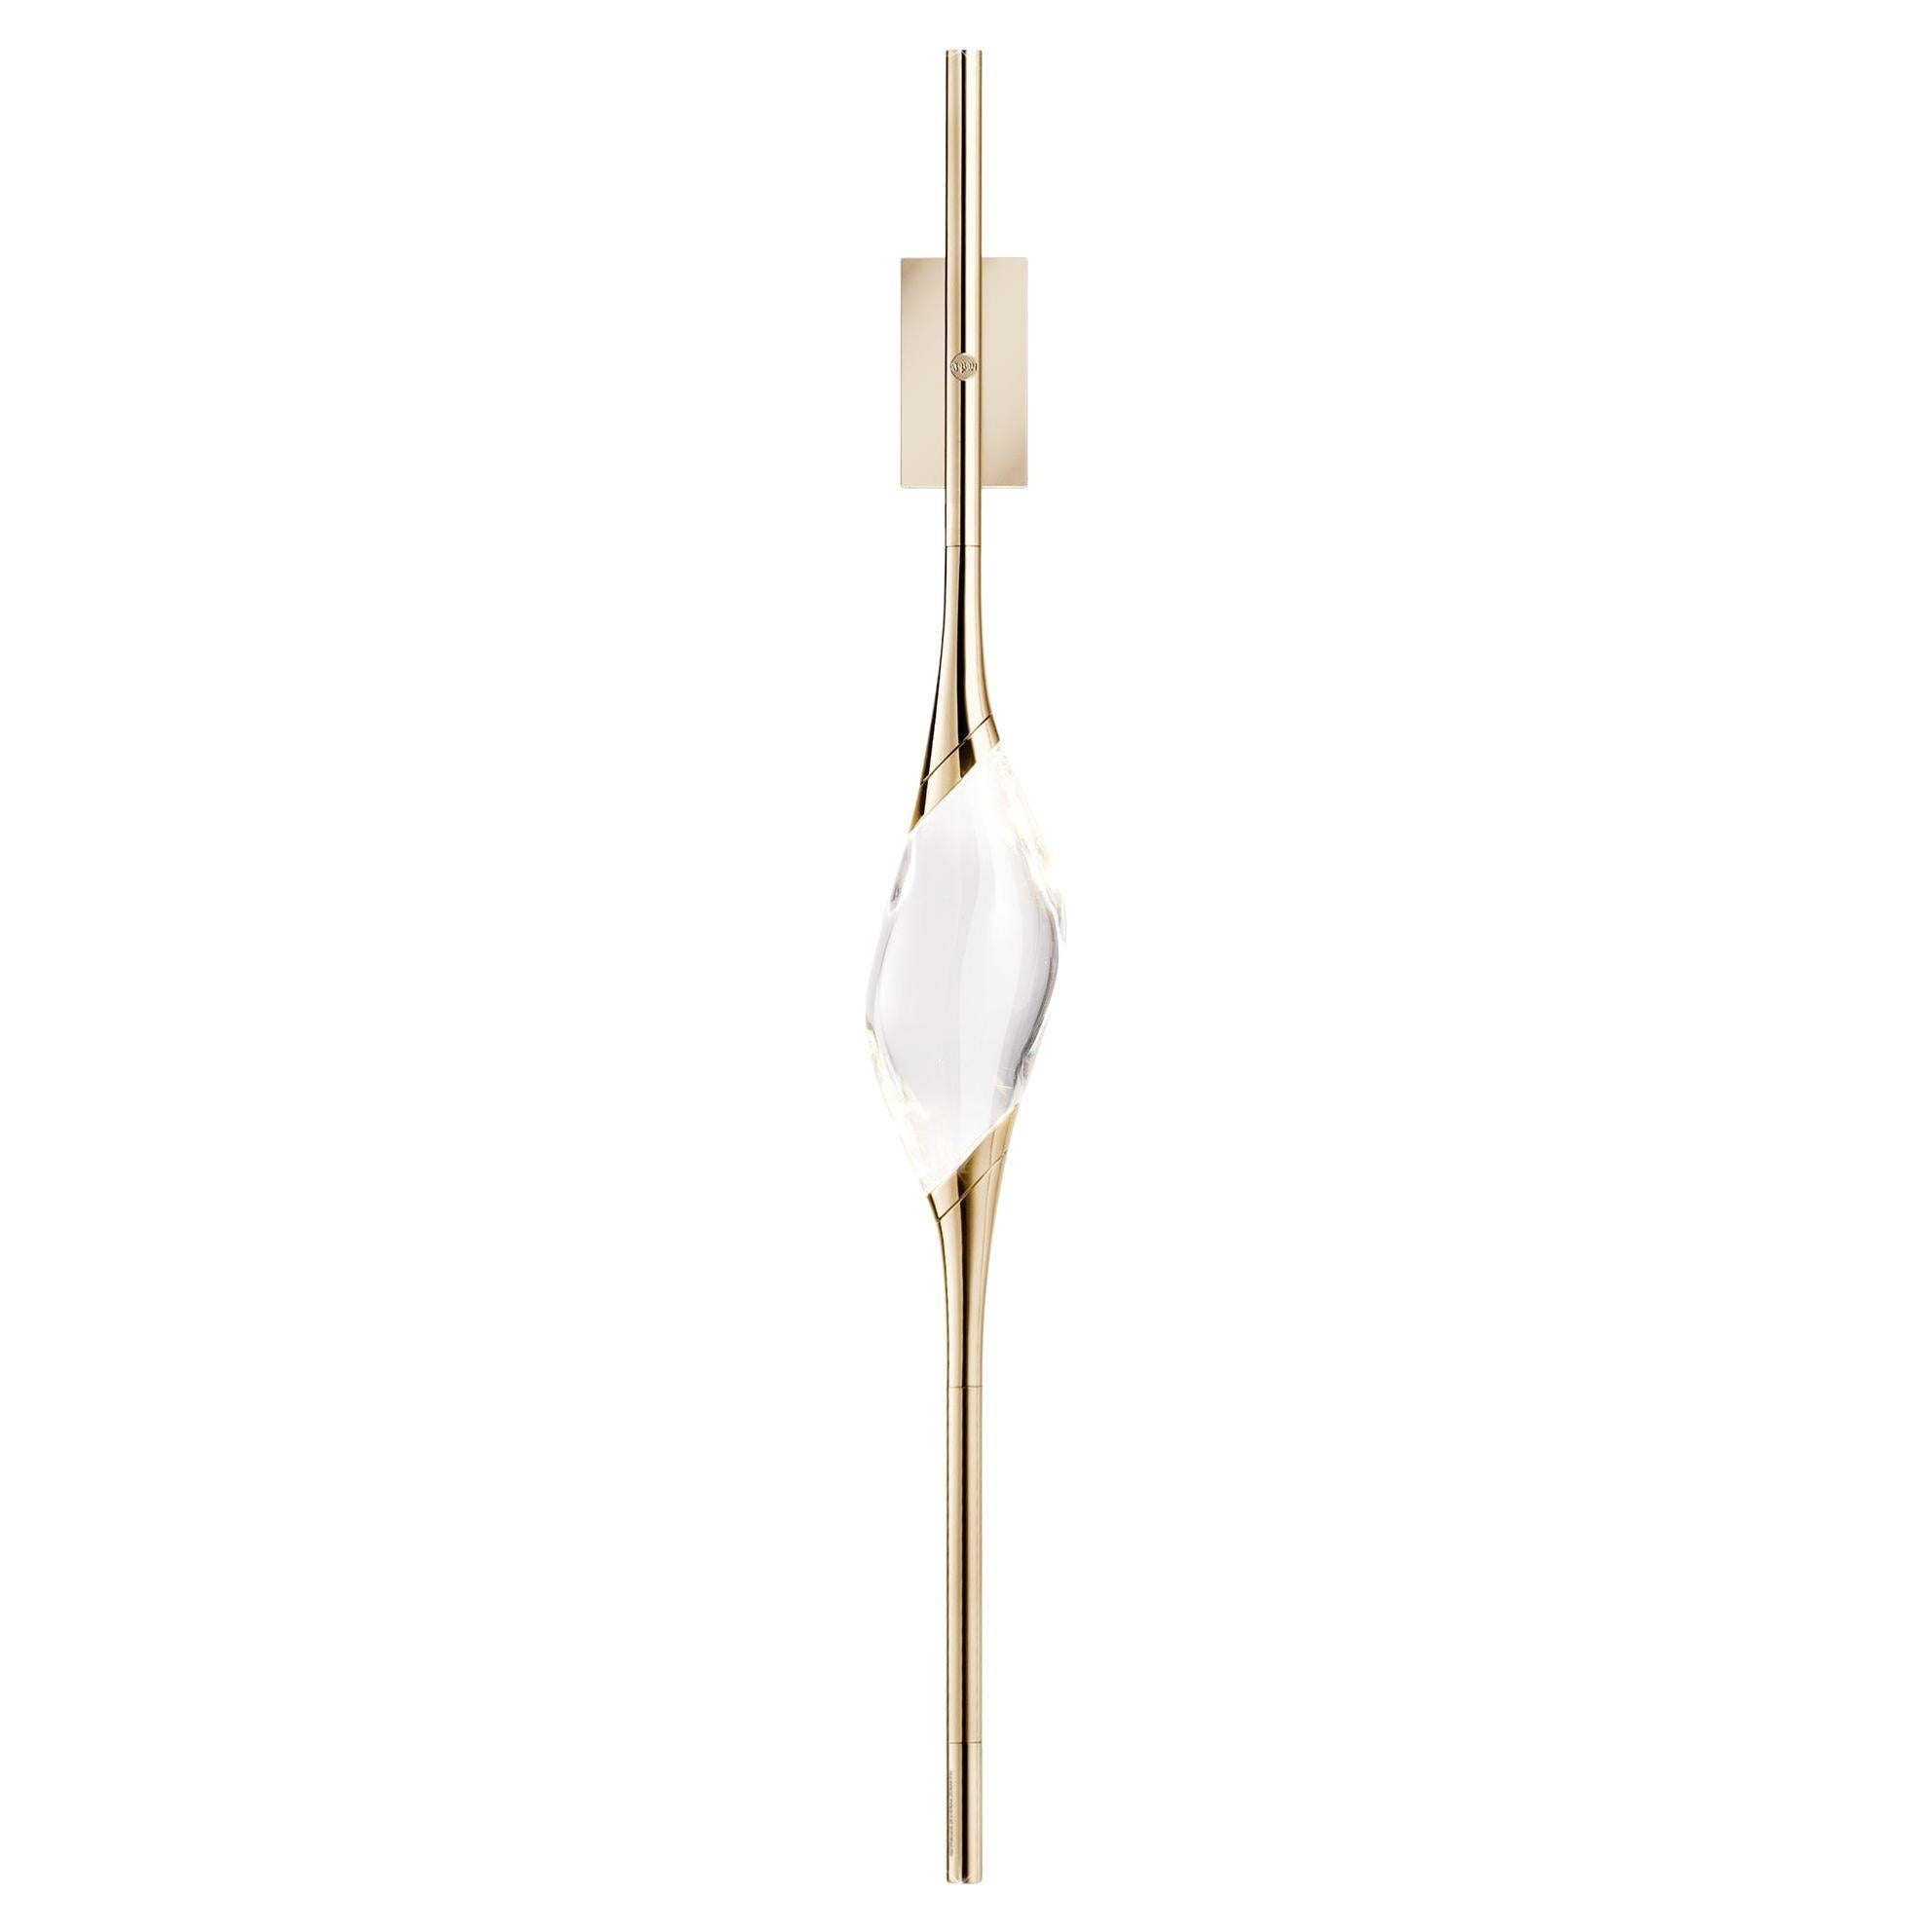 "Il Pezzo 12 Wall Sconce" - polished brass - crystal - LEDs - Made in Italy en vente